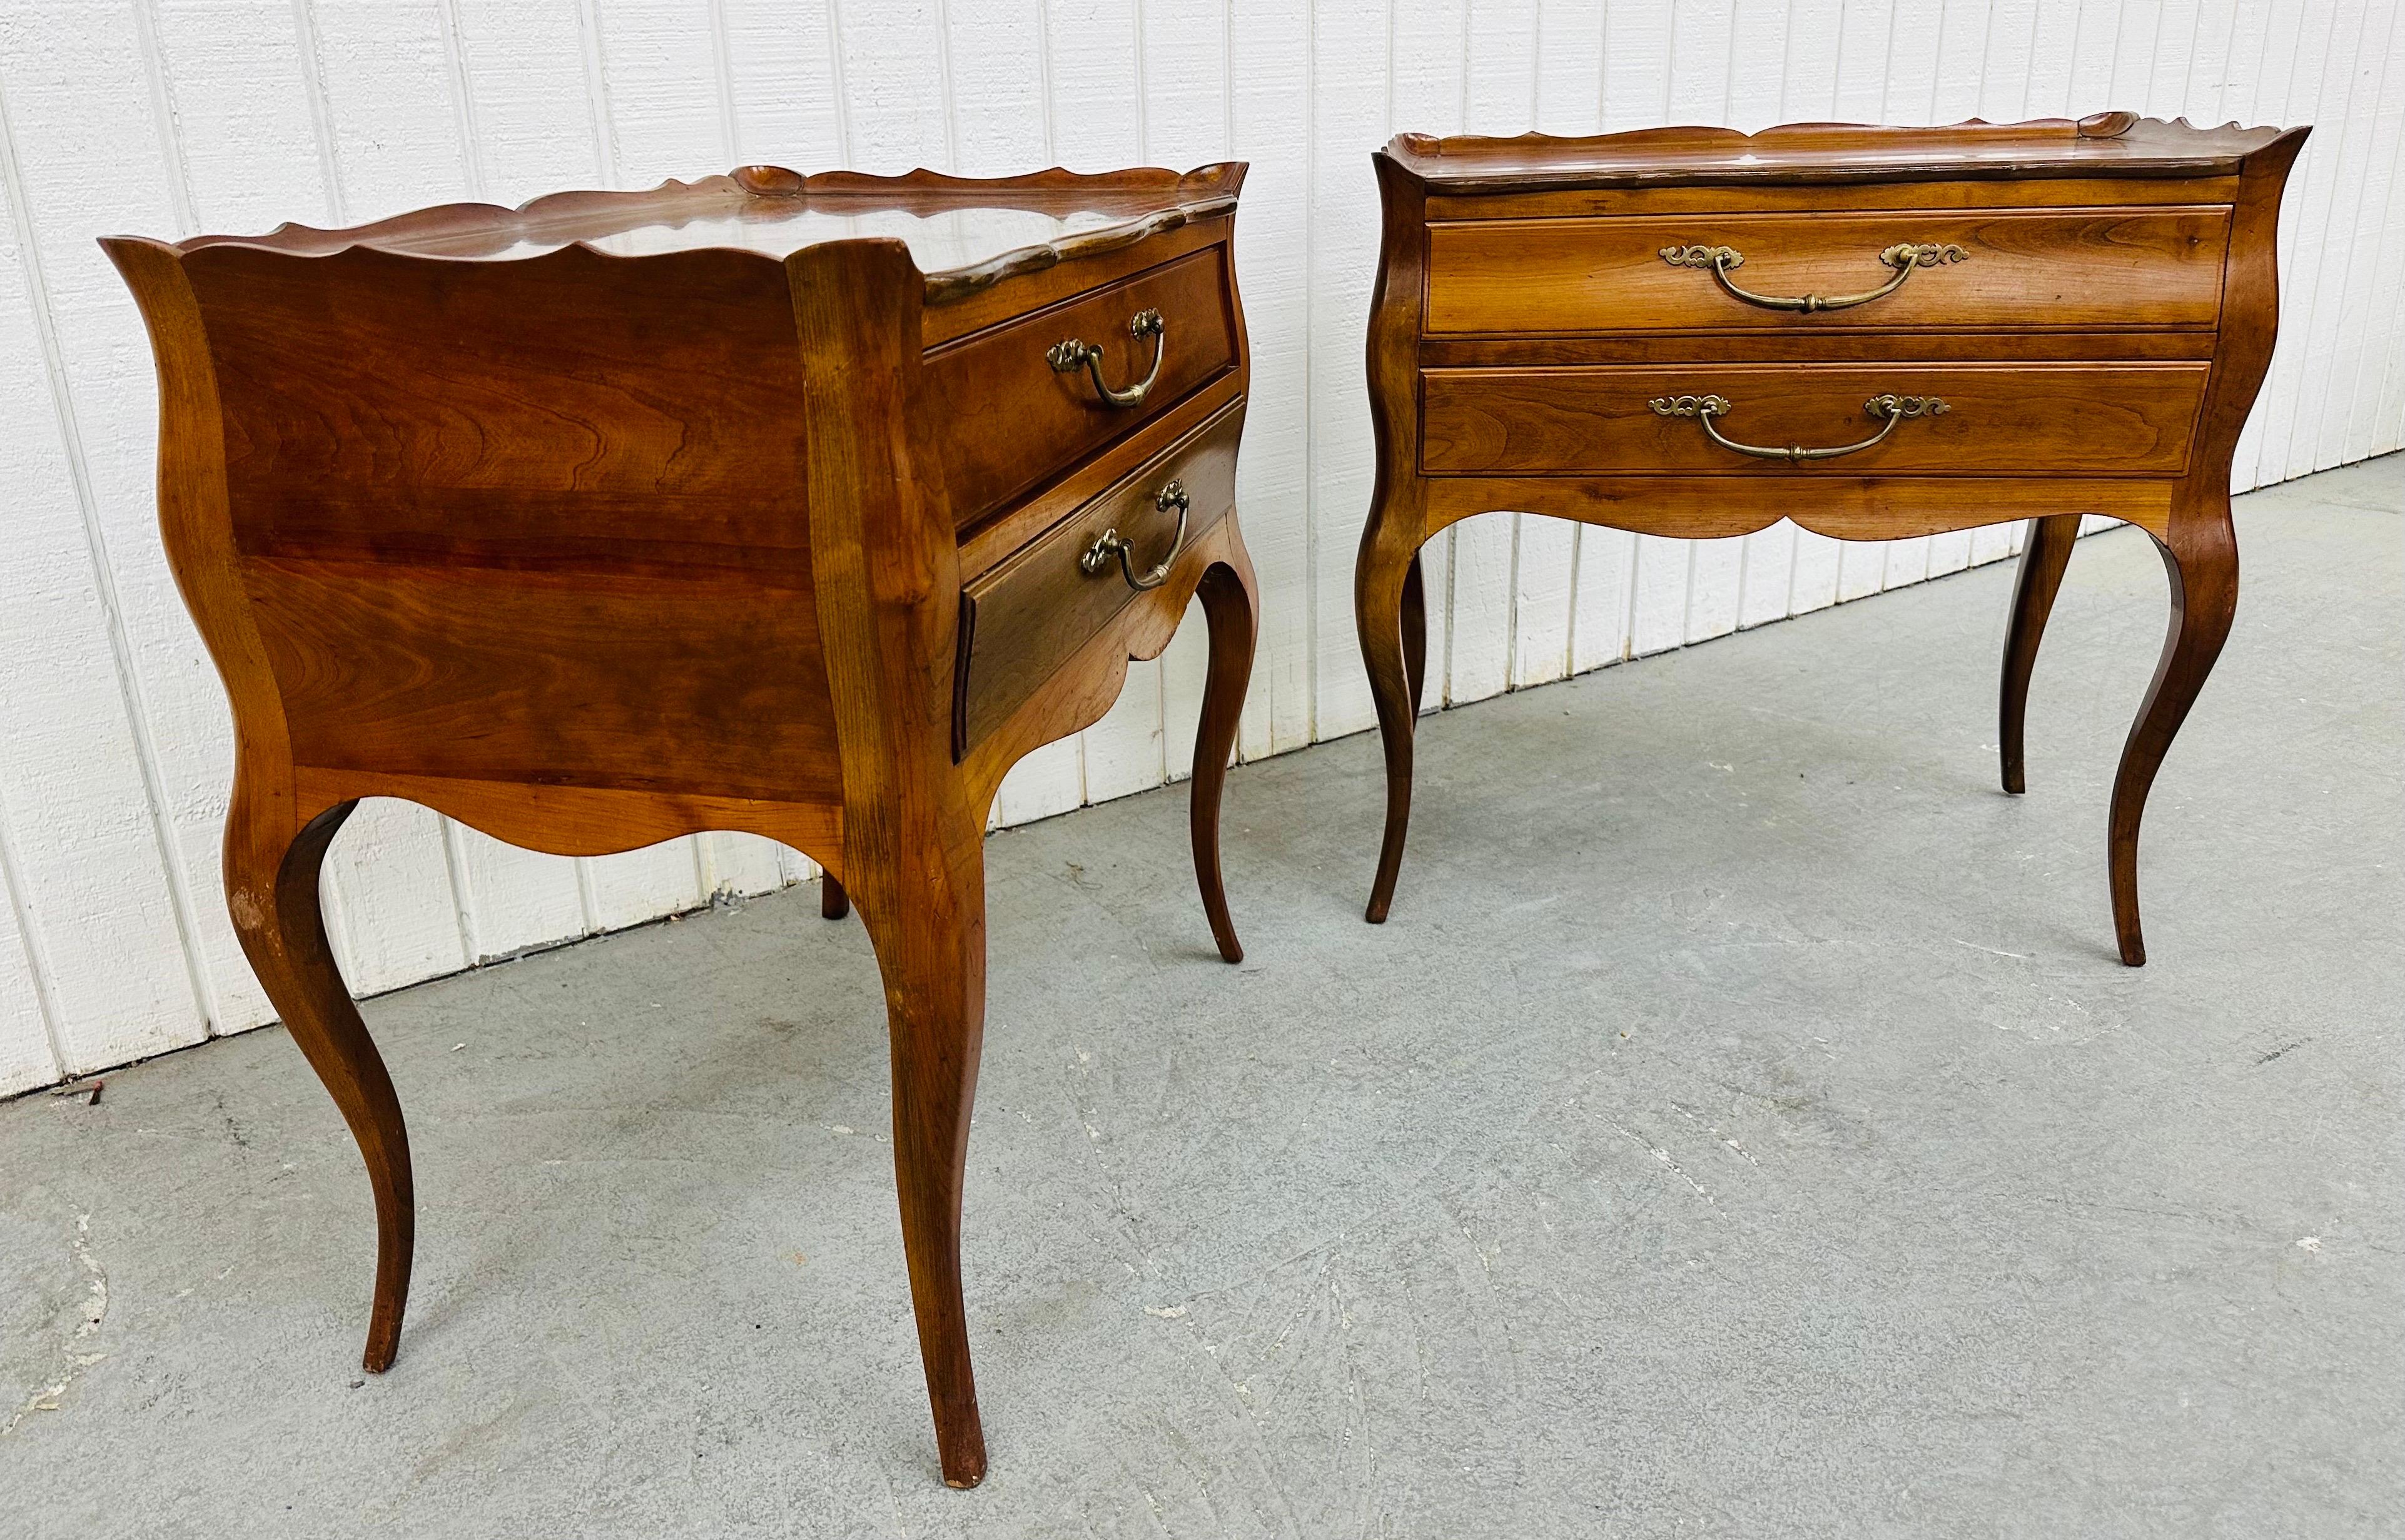 French Provincial Vintage French Style Cherry Wood Nightstands - Set of 2